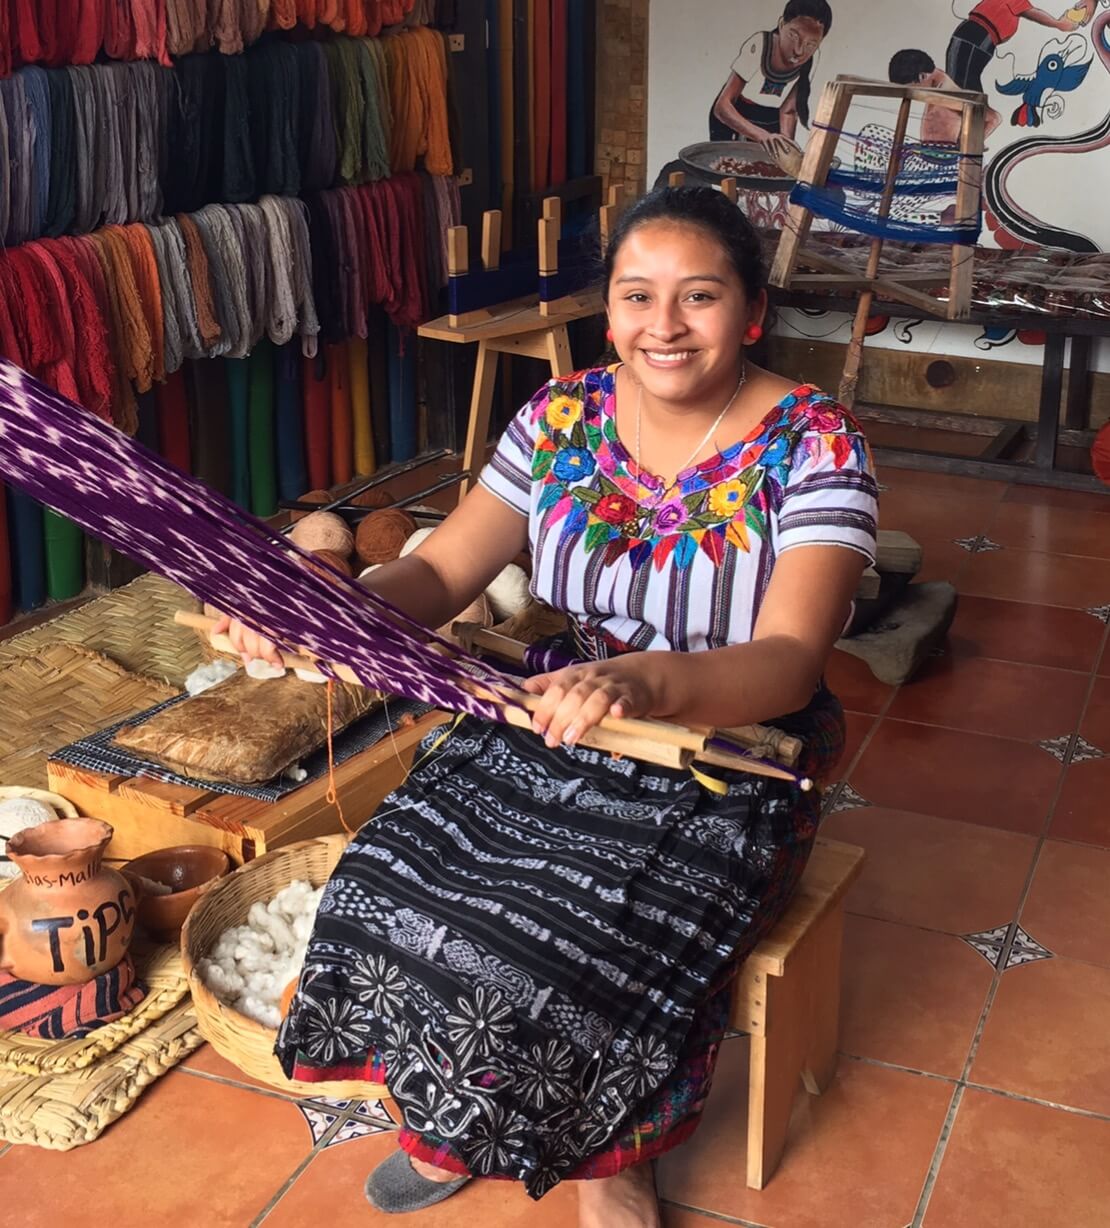 Enrichment and cultural activities in Guatemala